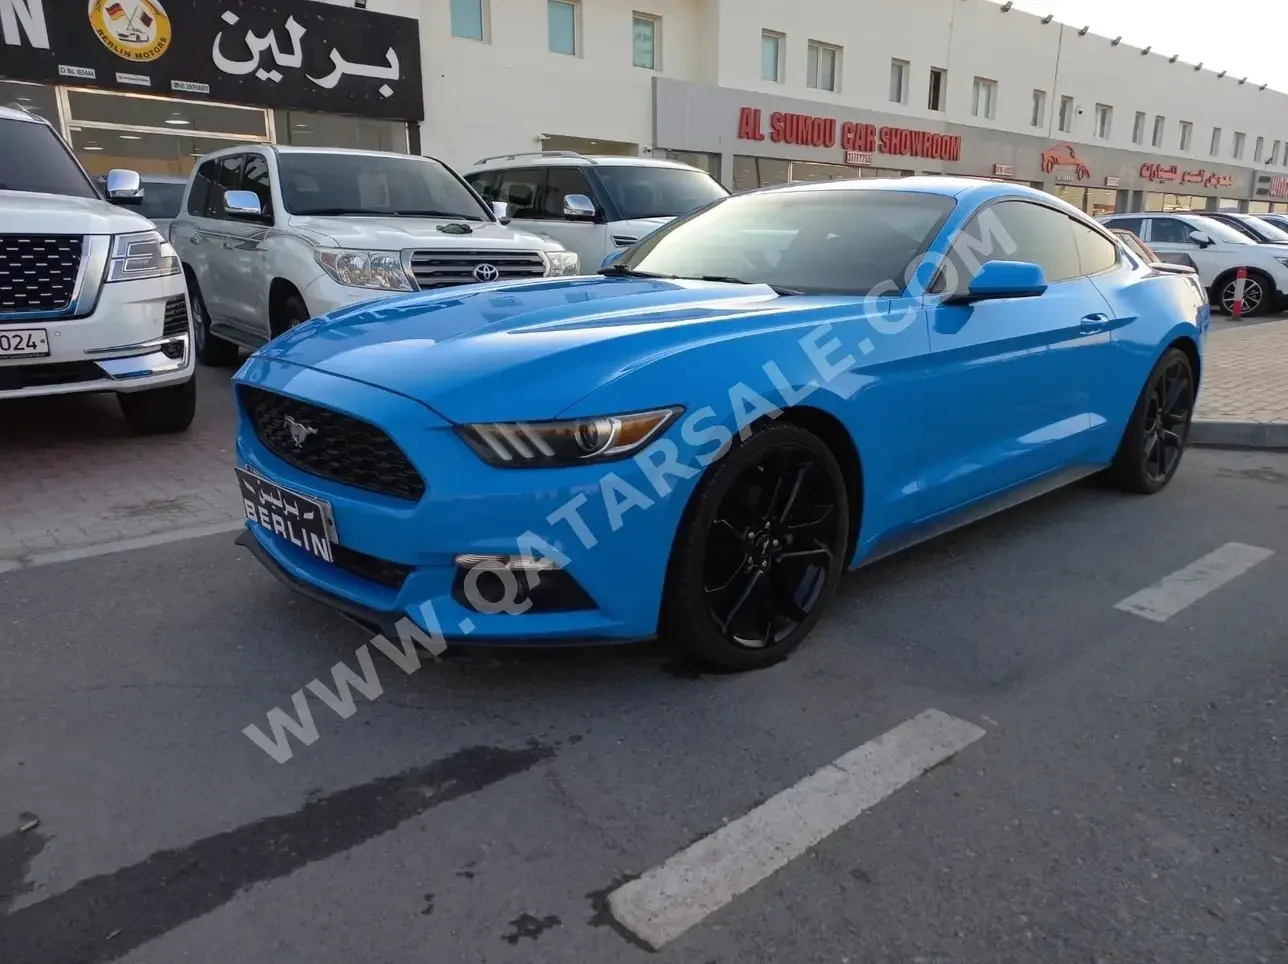 Ford  Mustang  GT  2017  Automatic  250,000 Km  6 Cylinder  Rear Wheel Drive (RWD)  Coupe / Sport  Blue